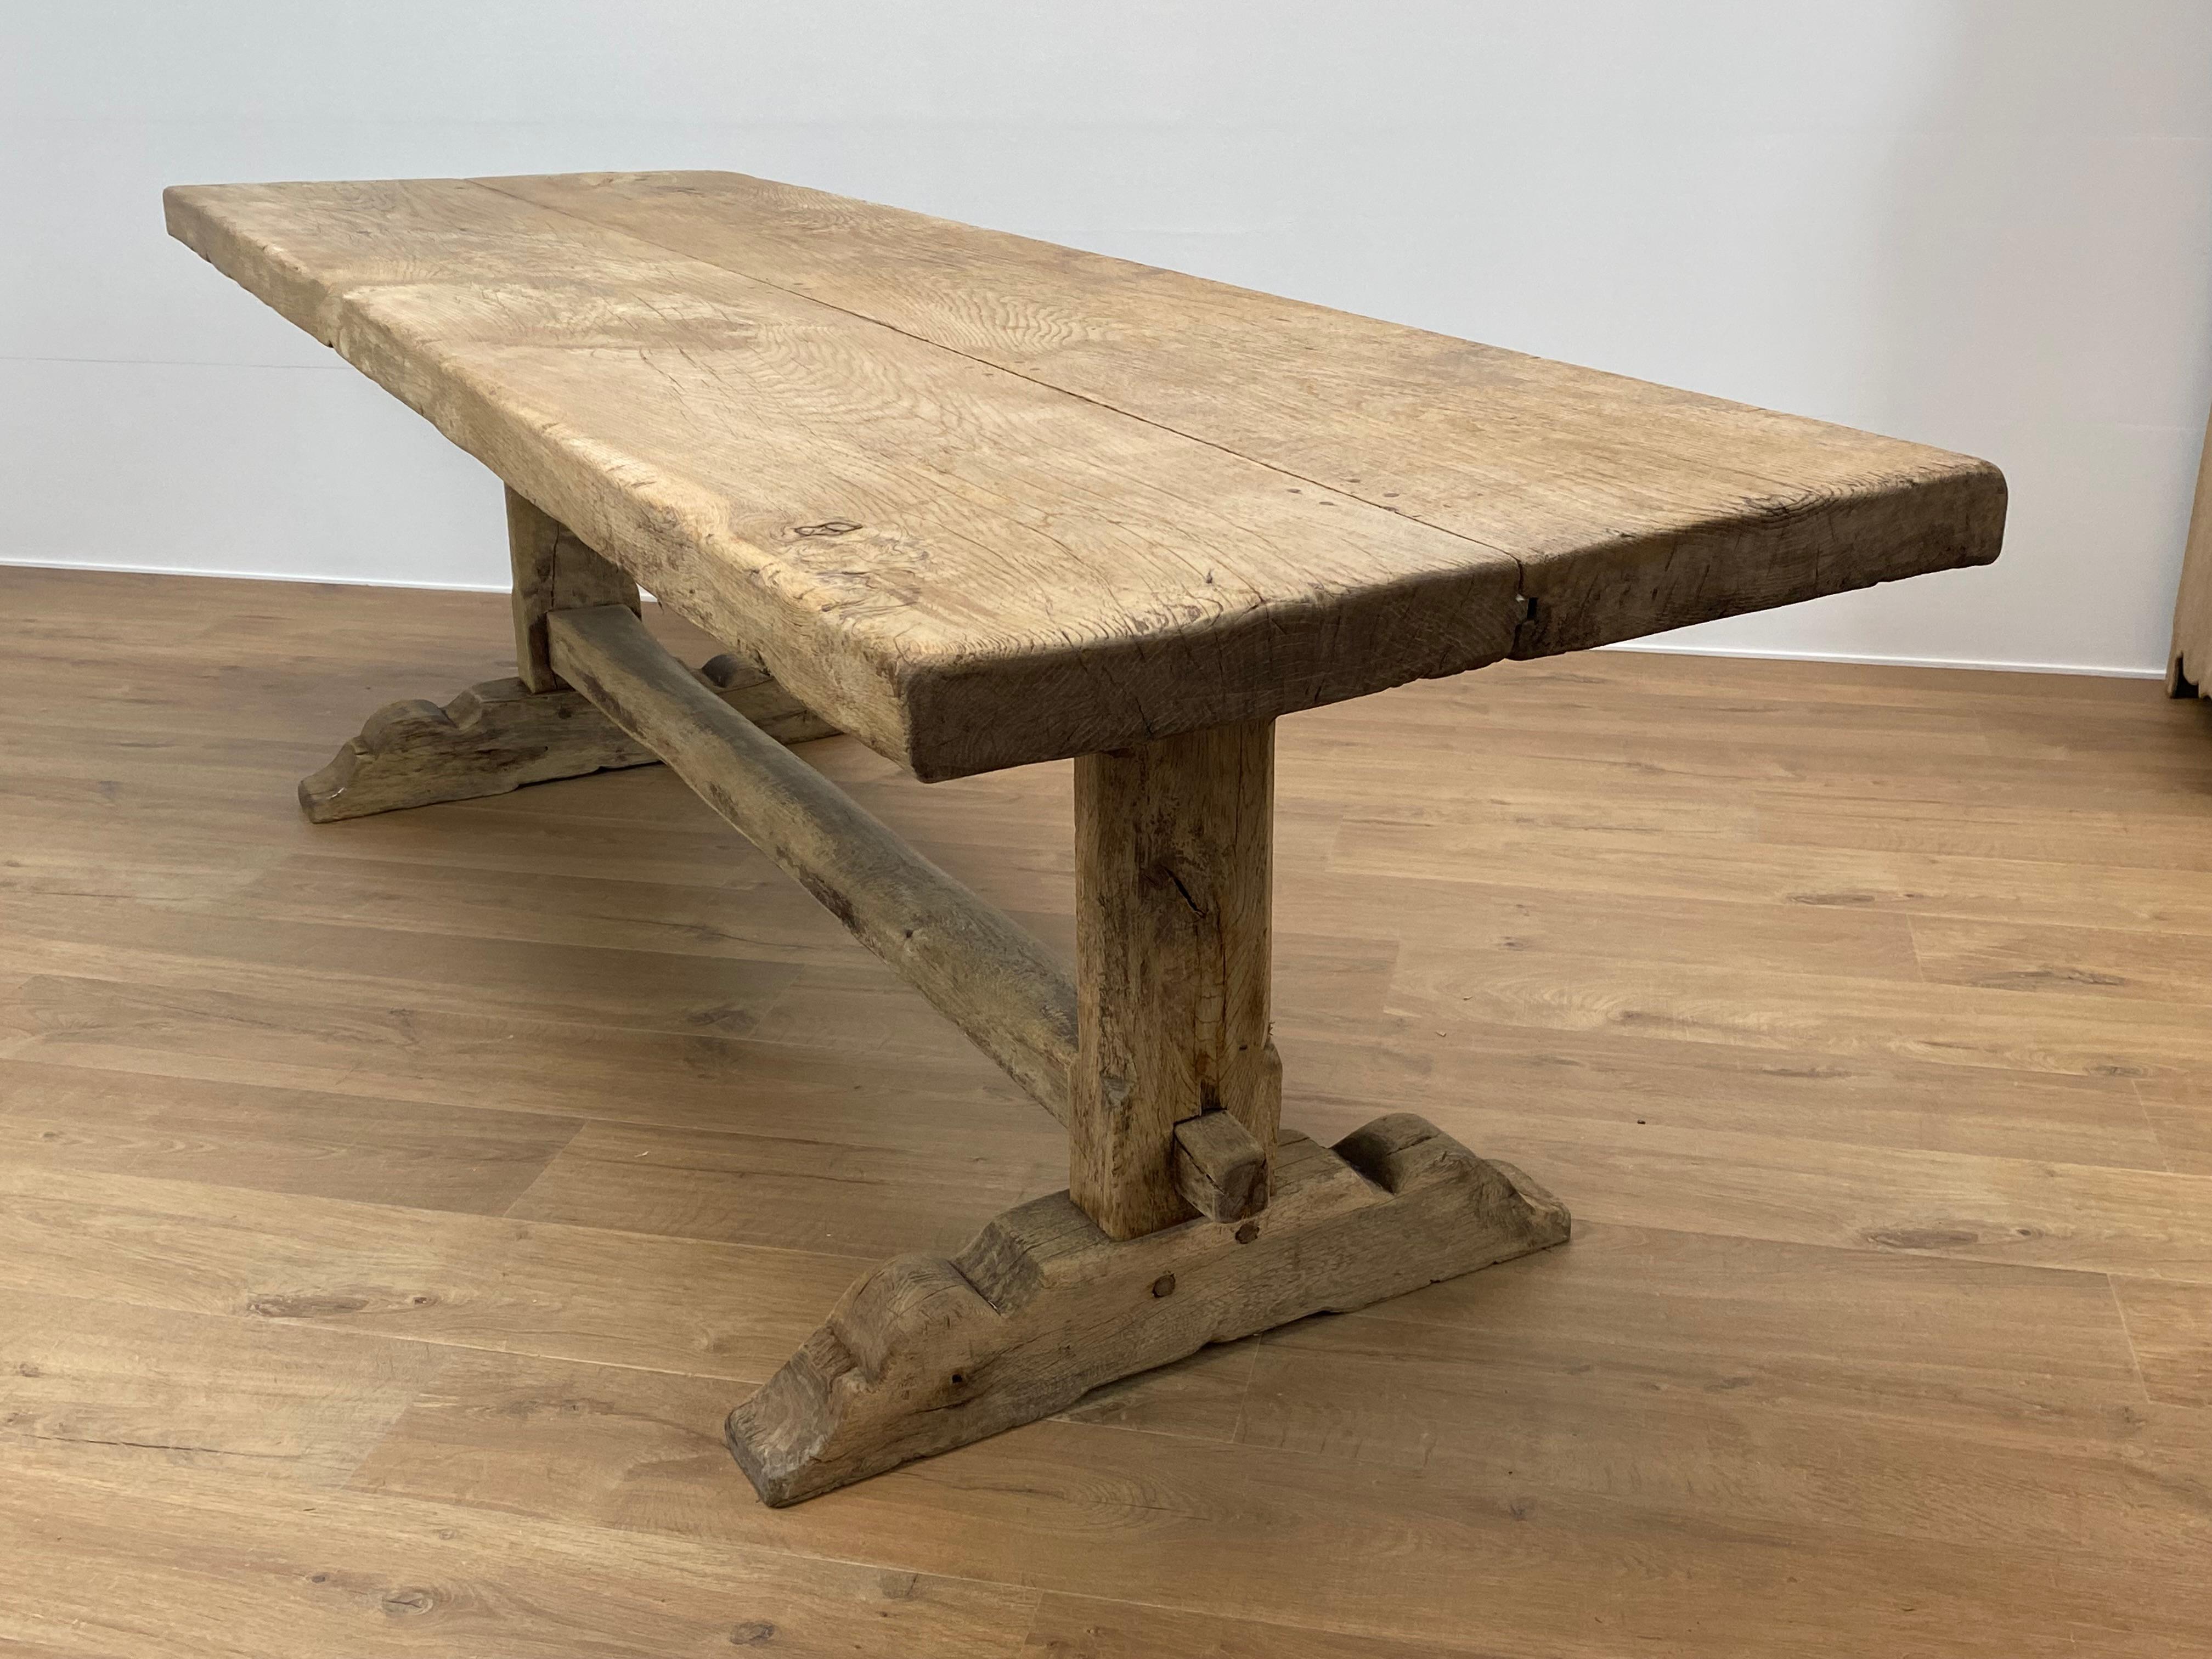 Brutalist and Rustic Antique Table from France, 1920,
beautifully bleached Oak,
good antique shine and patina,
thick table top of 7 cm,
can be used as a dining table or as a center table as well as a desk